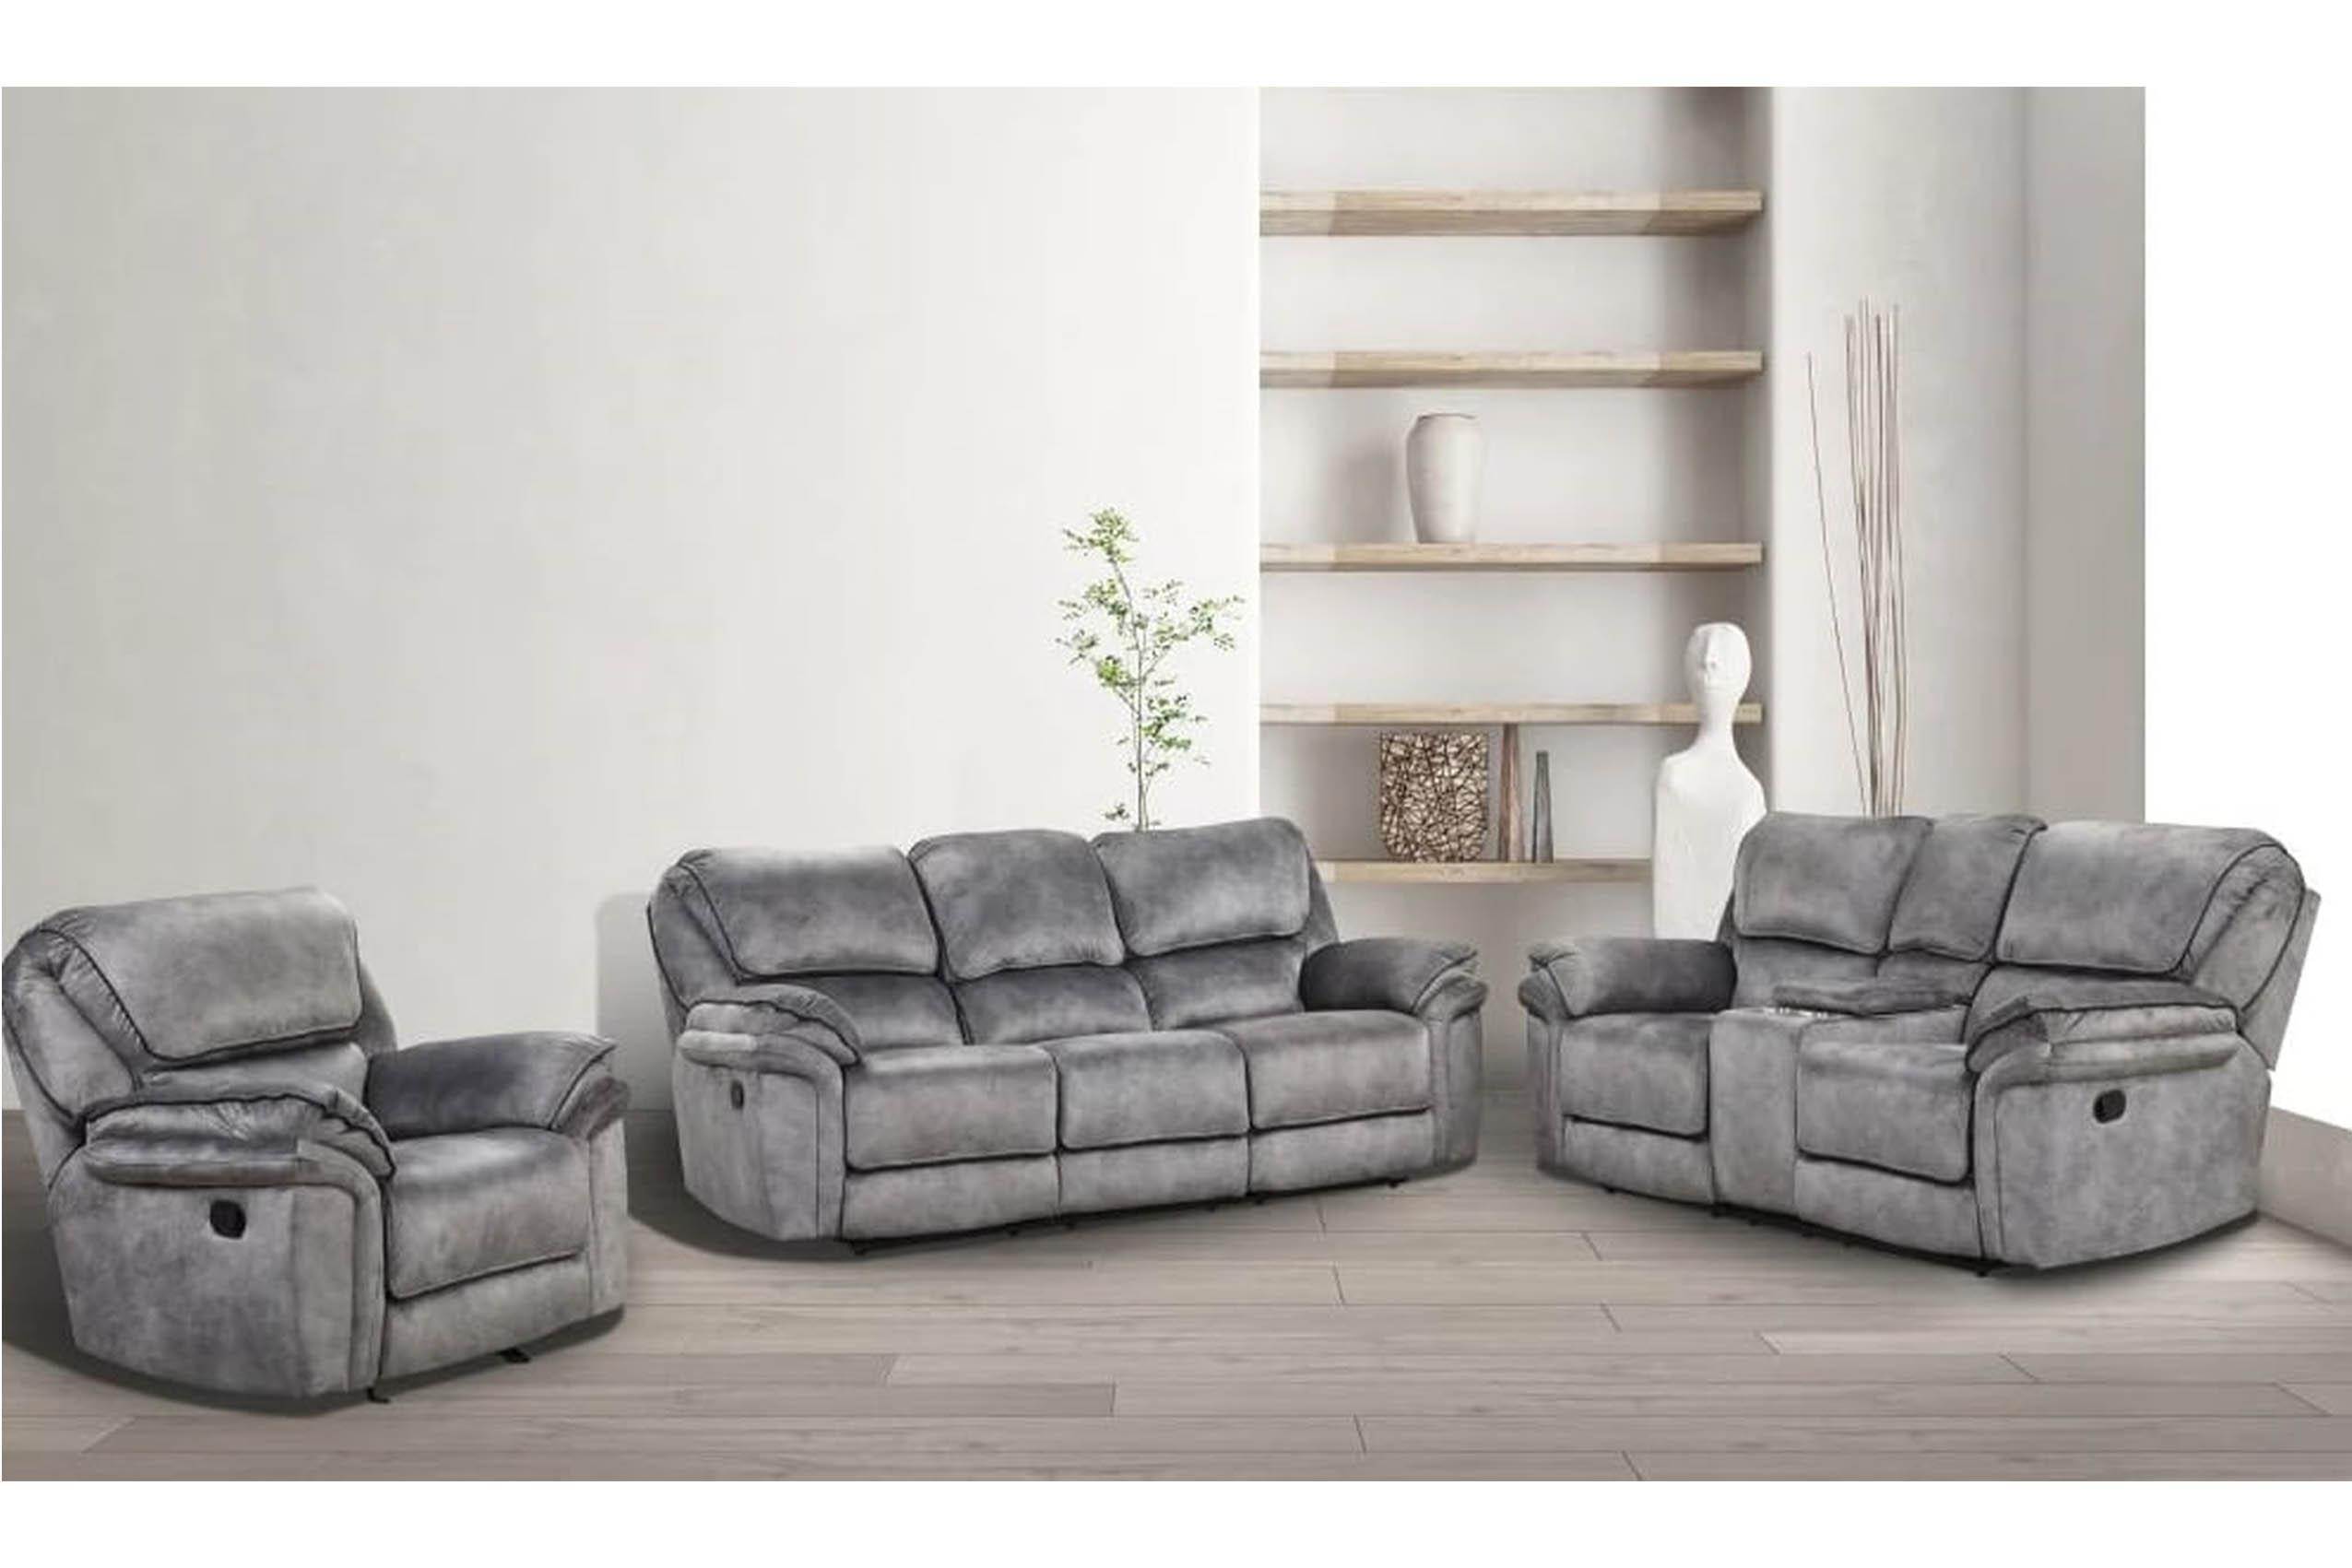 Contemporary, Modern Recliner Sofa Set NX6002GY-SF-Set-3 NX6002GY-SF-Set-3 in Gray Leatherette